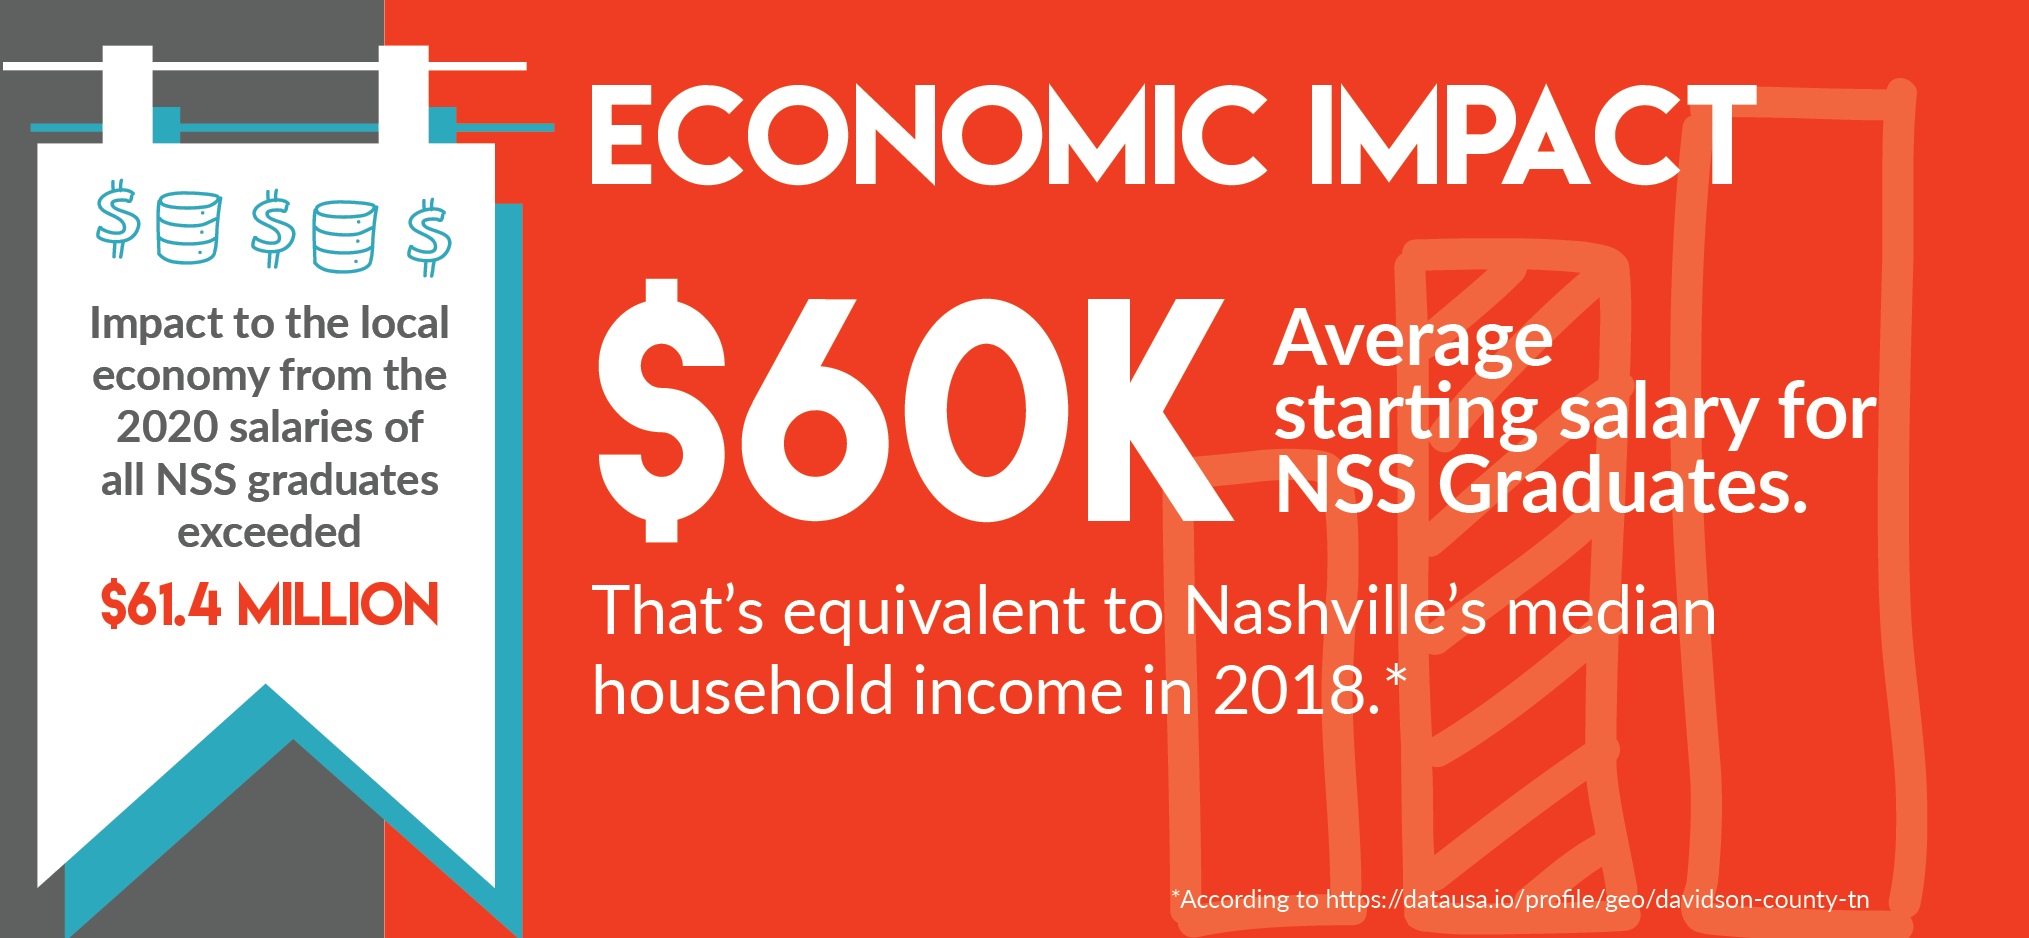 Economic Impact - $60k is the average starting salary for NSS graduates.